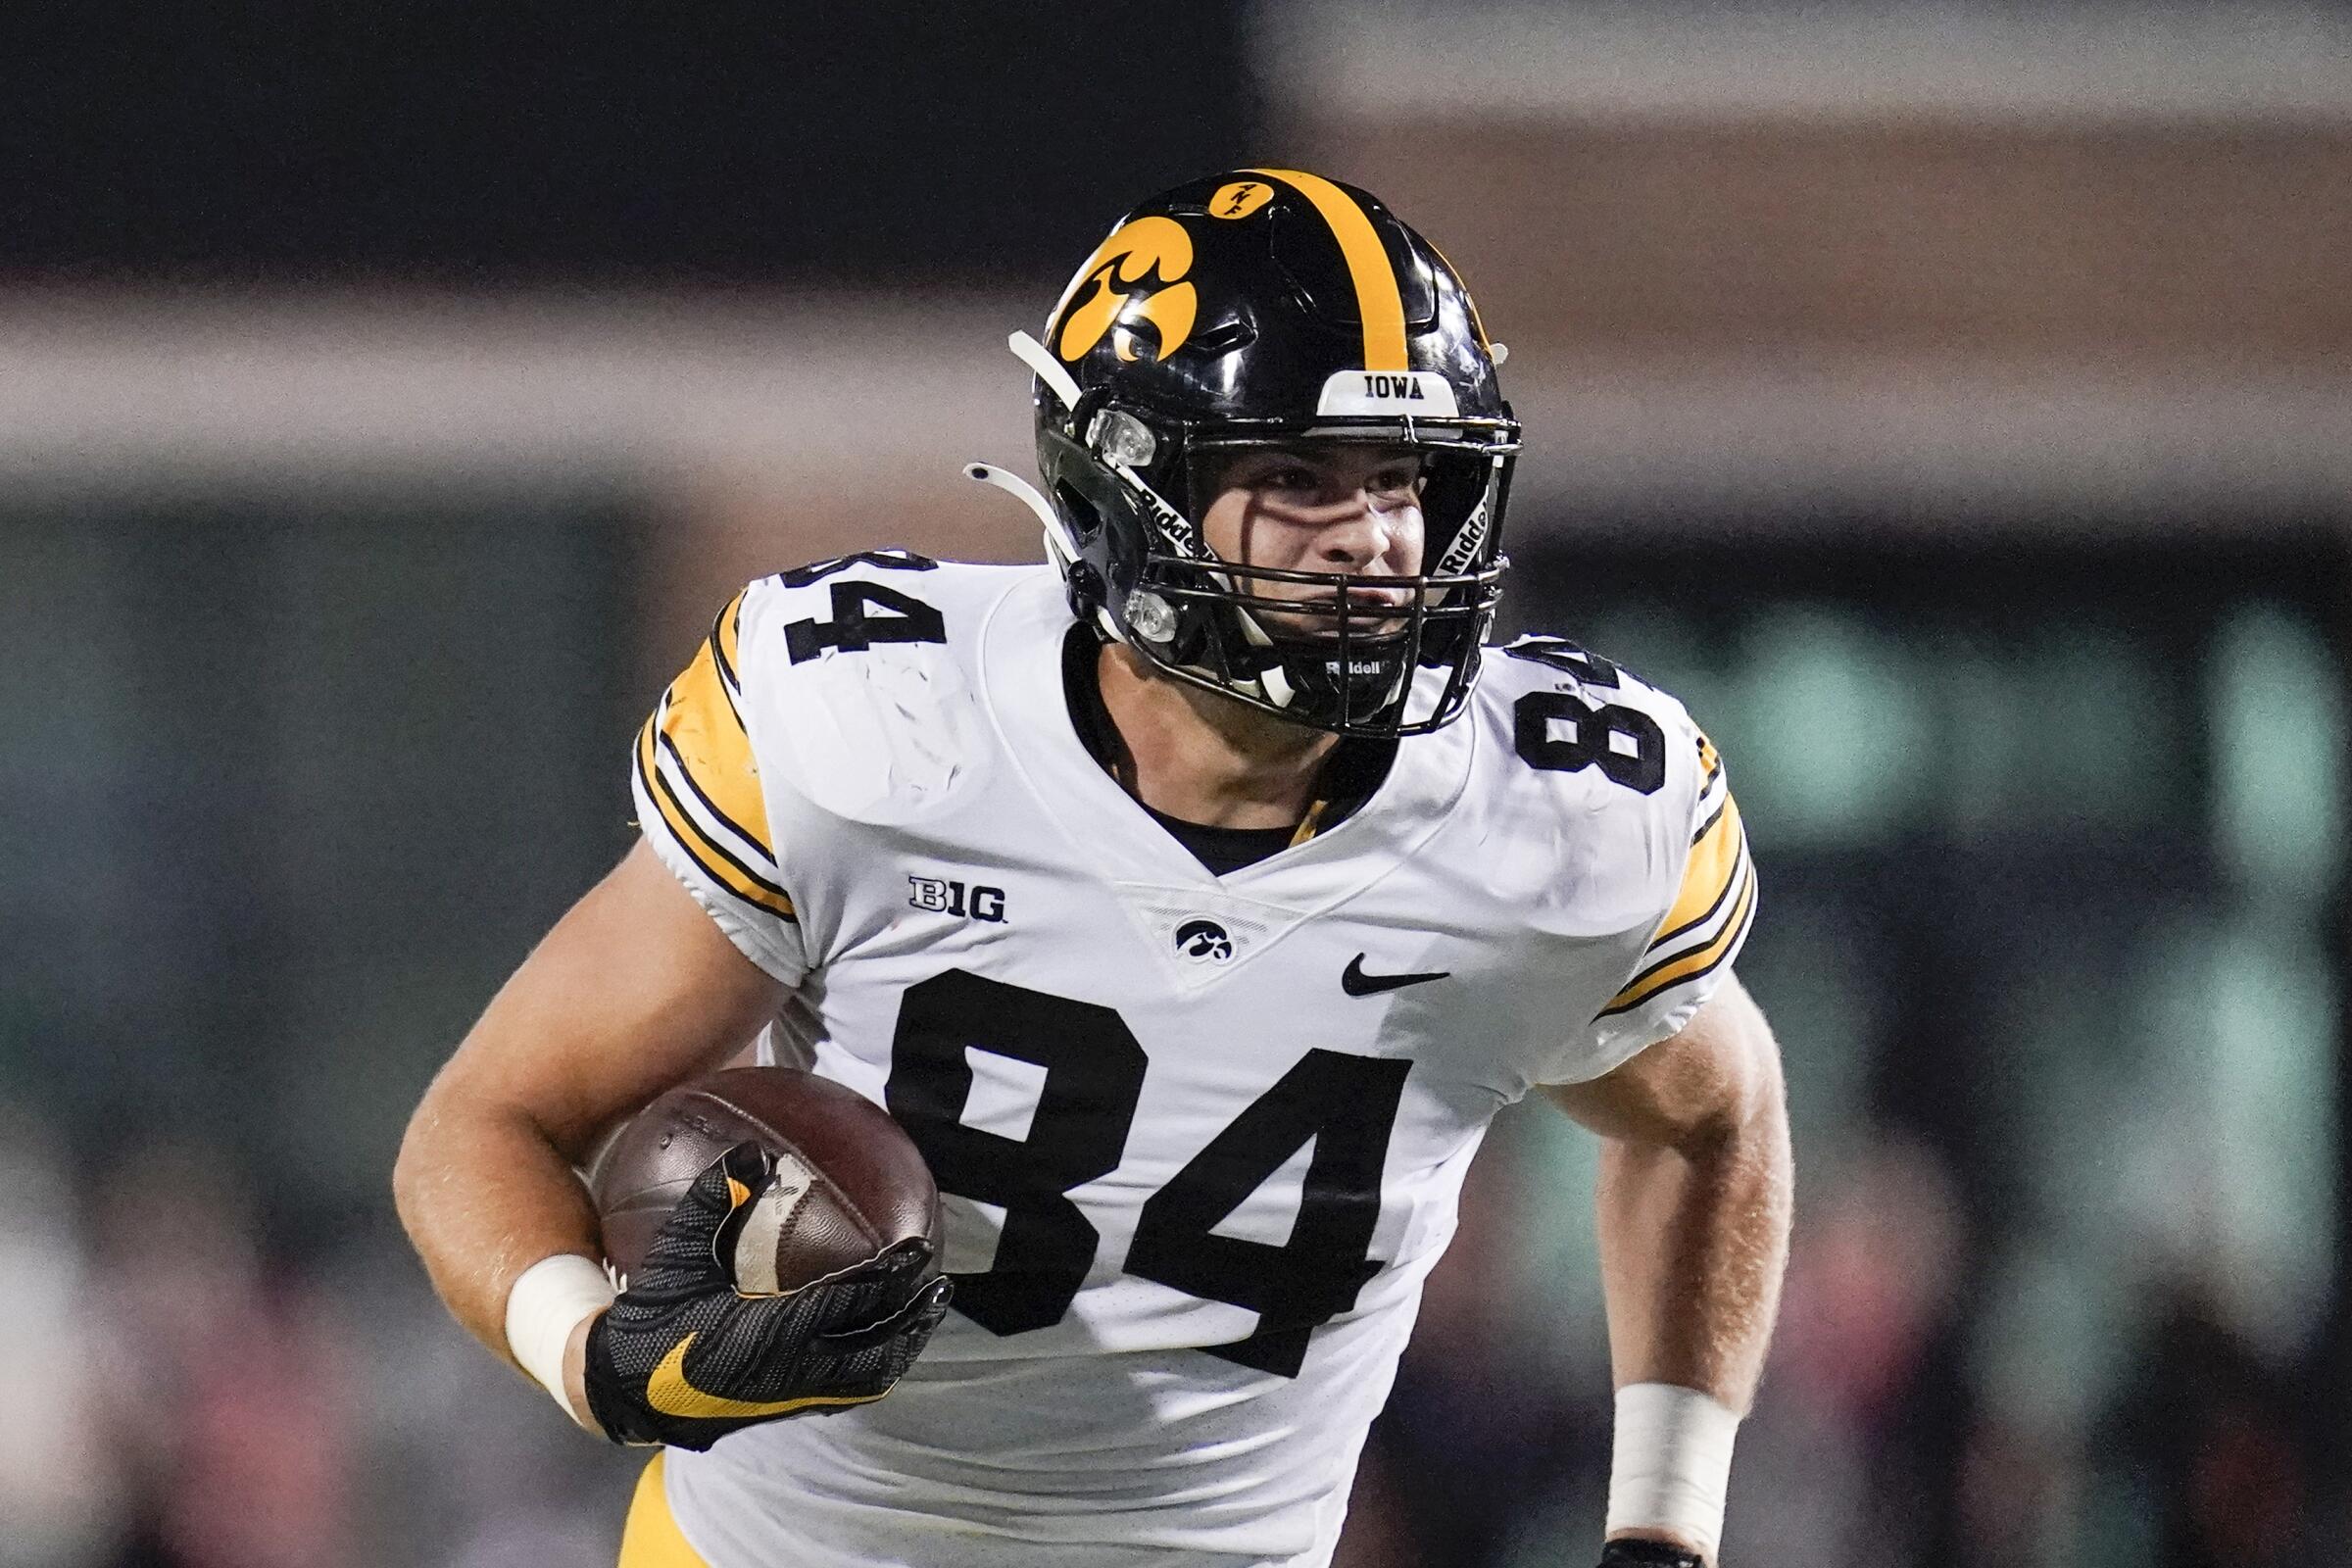 Iowa tight end Sam LaPorta runs with the ball after making a catch.